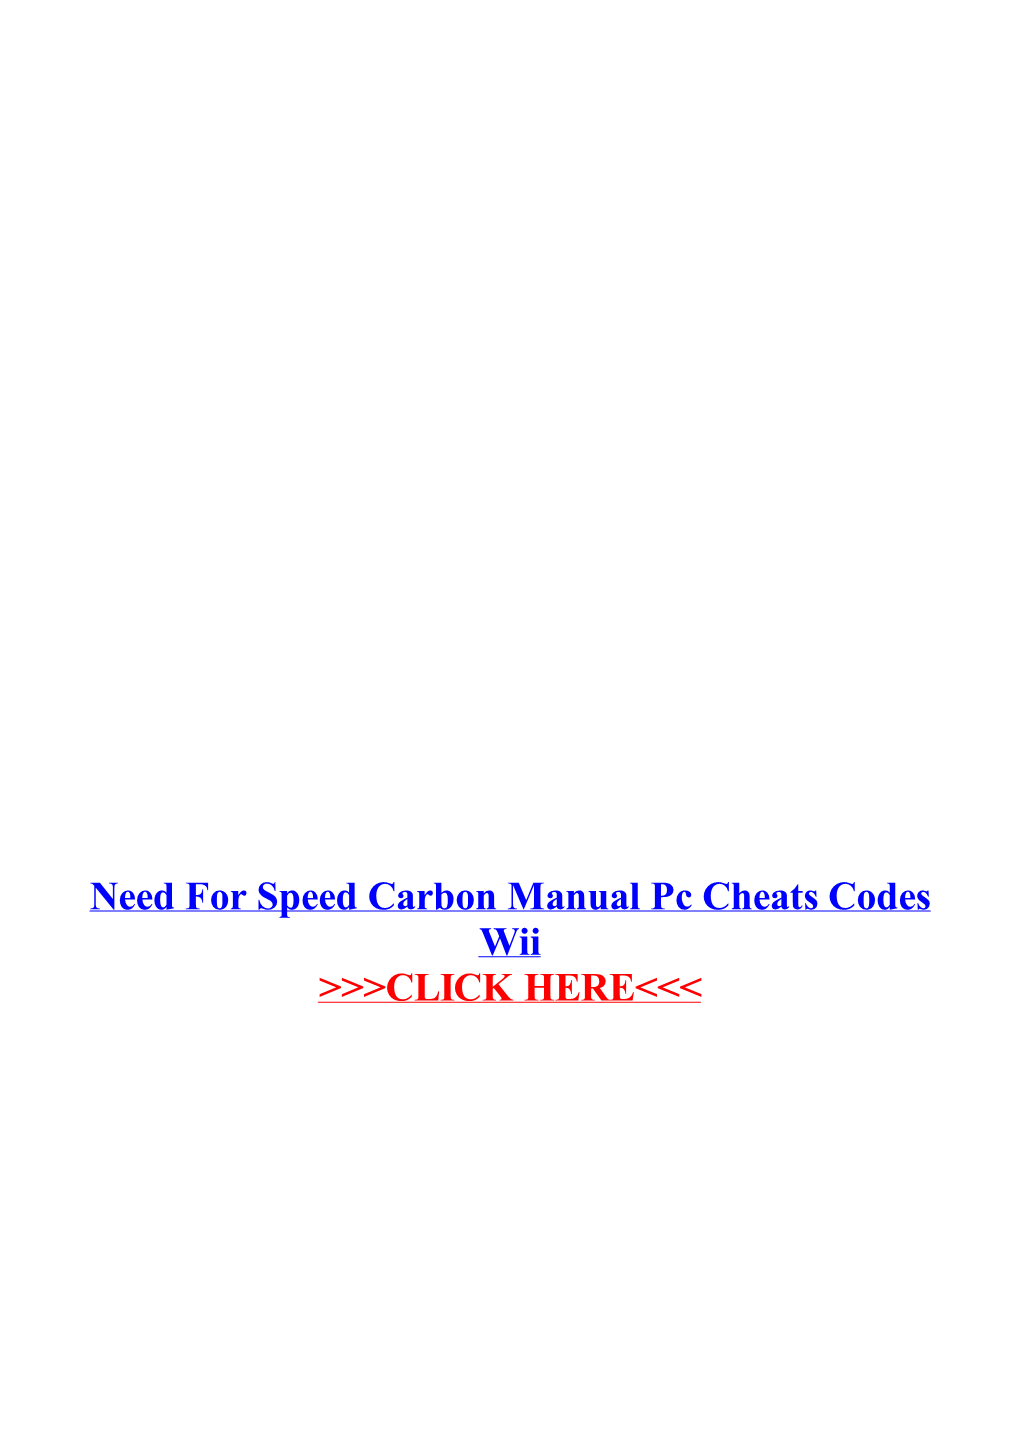 Need for Speed Carbon Manual Pc Cheats Codes Wii